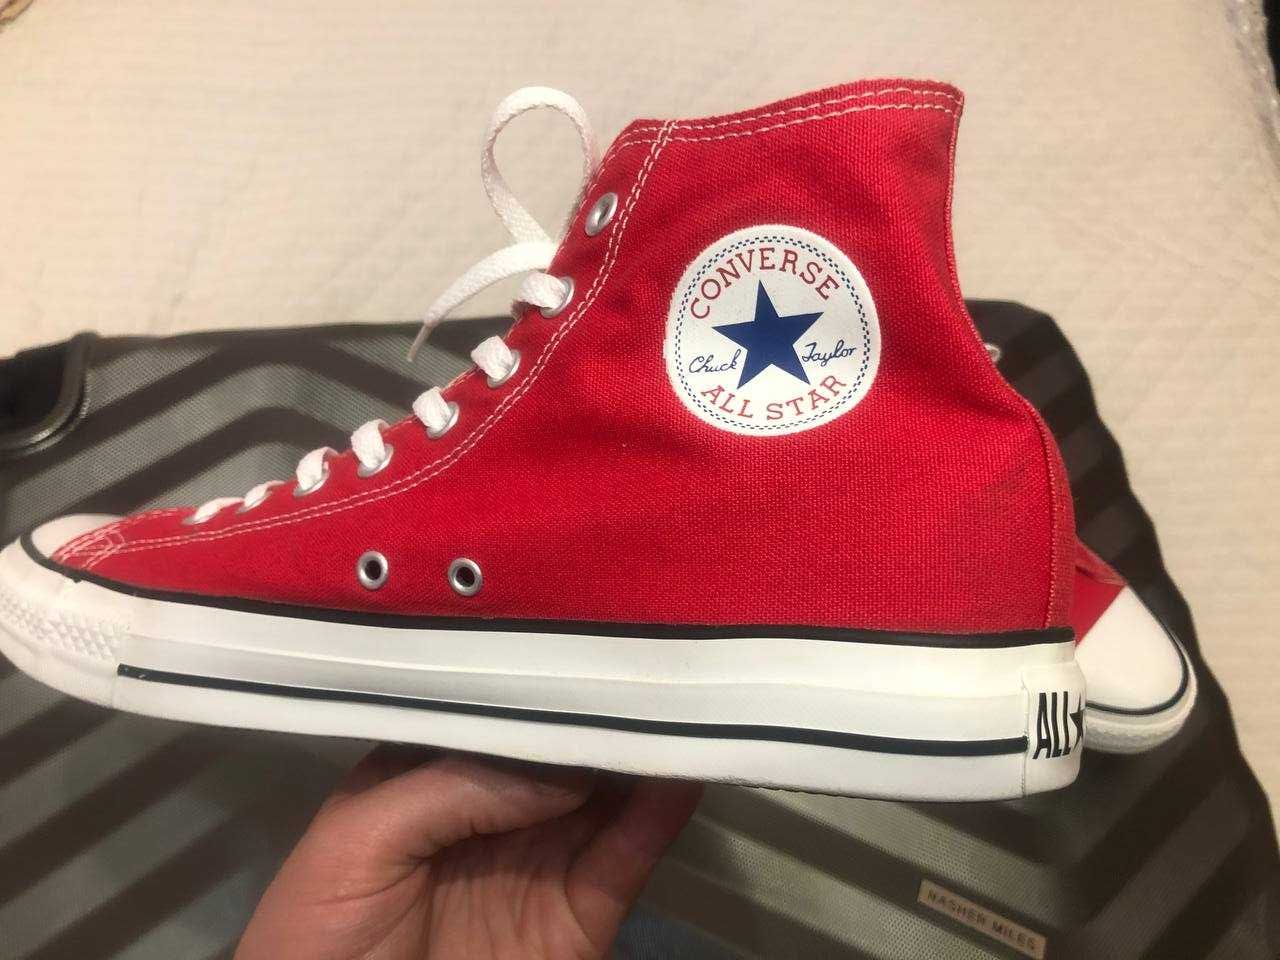 Converse Chuck Taylor All Star Red MID size 48